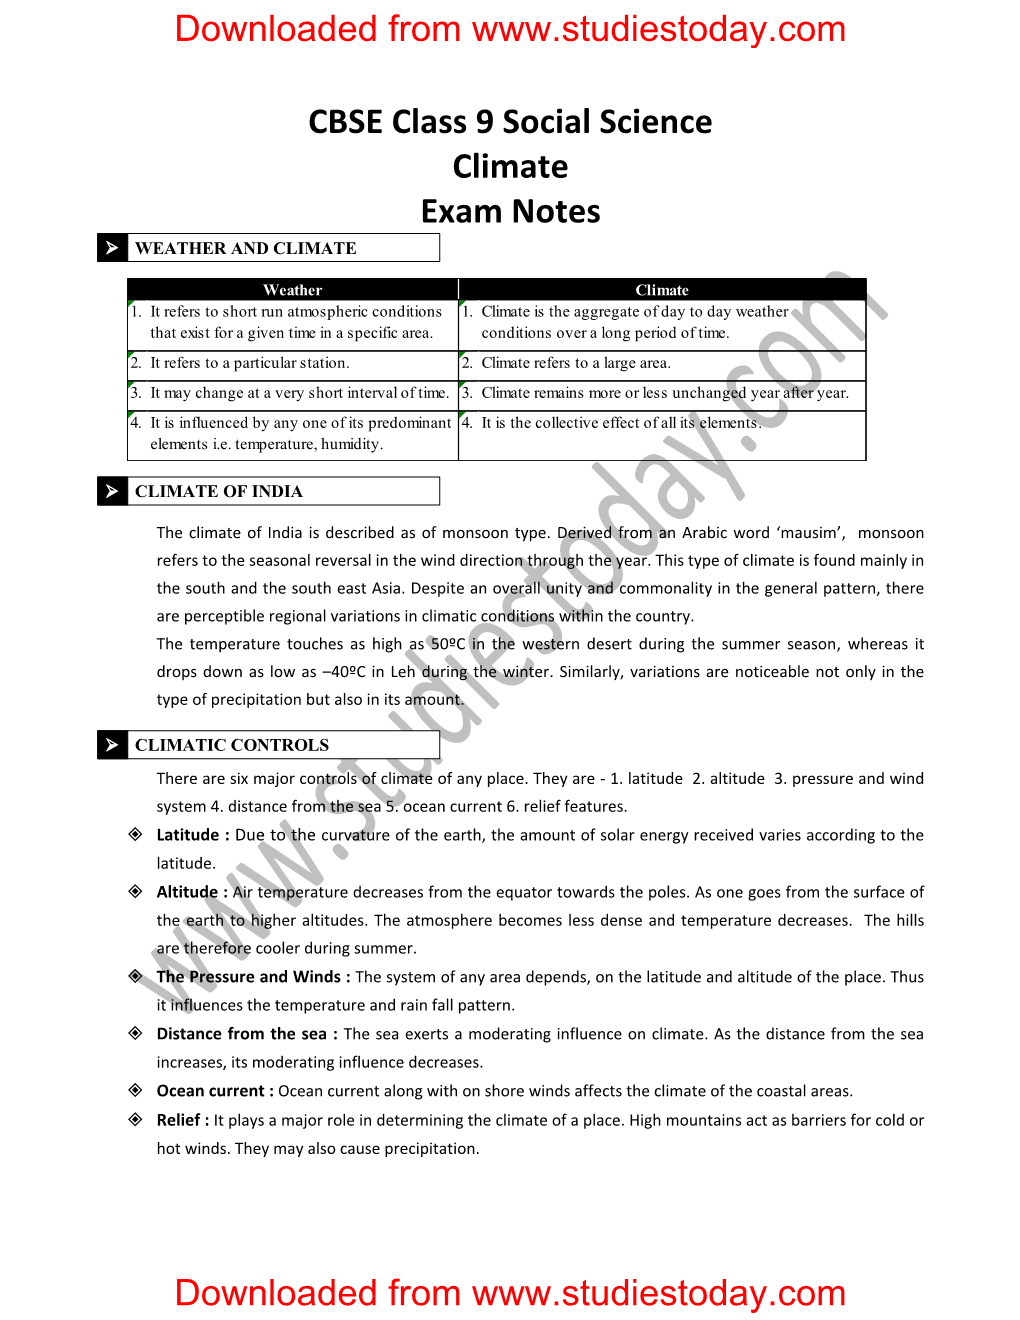 CBSE Class 9 Social Science Climate Exam Notes Downloaded from Www